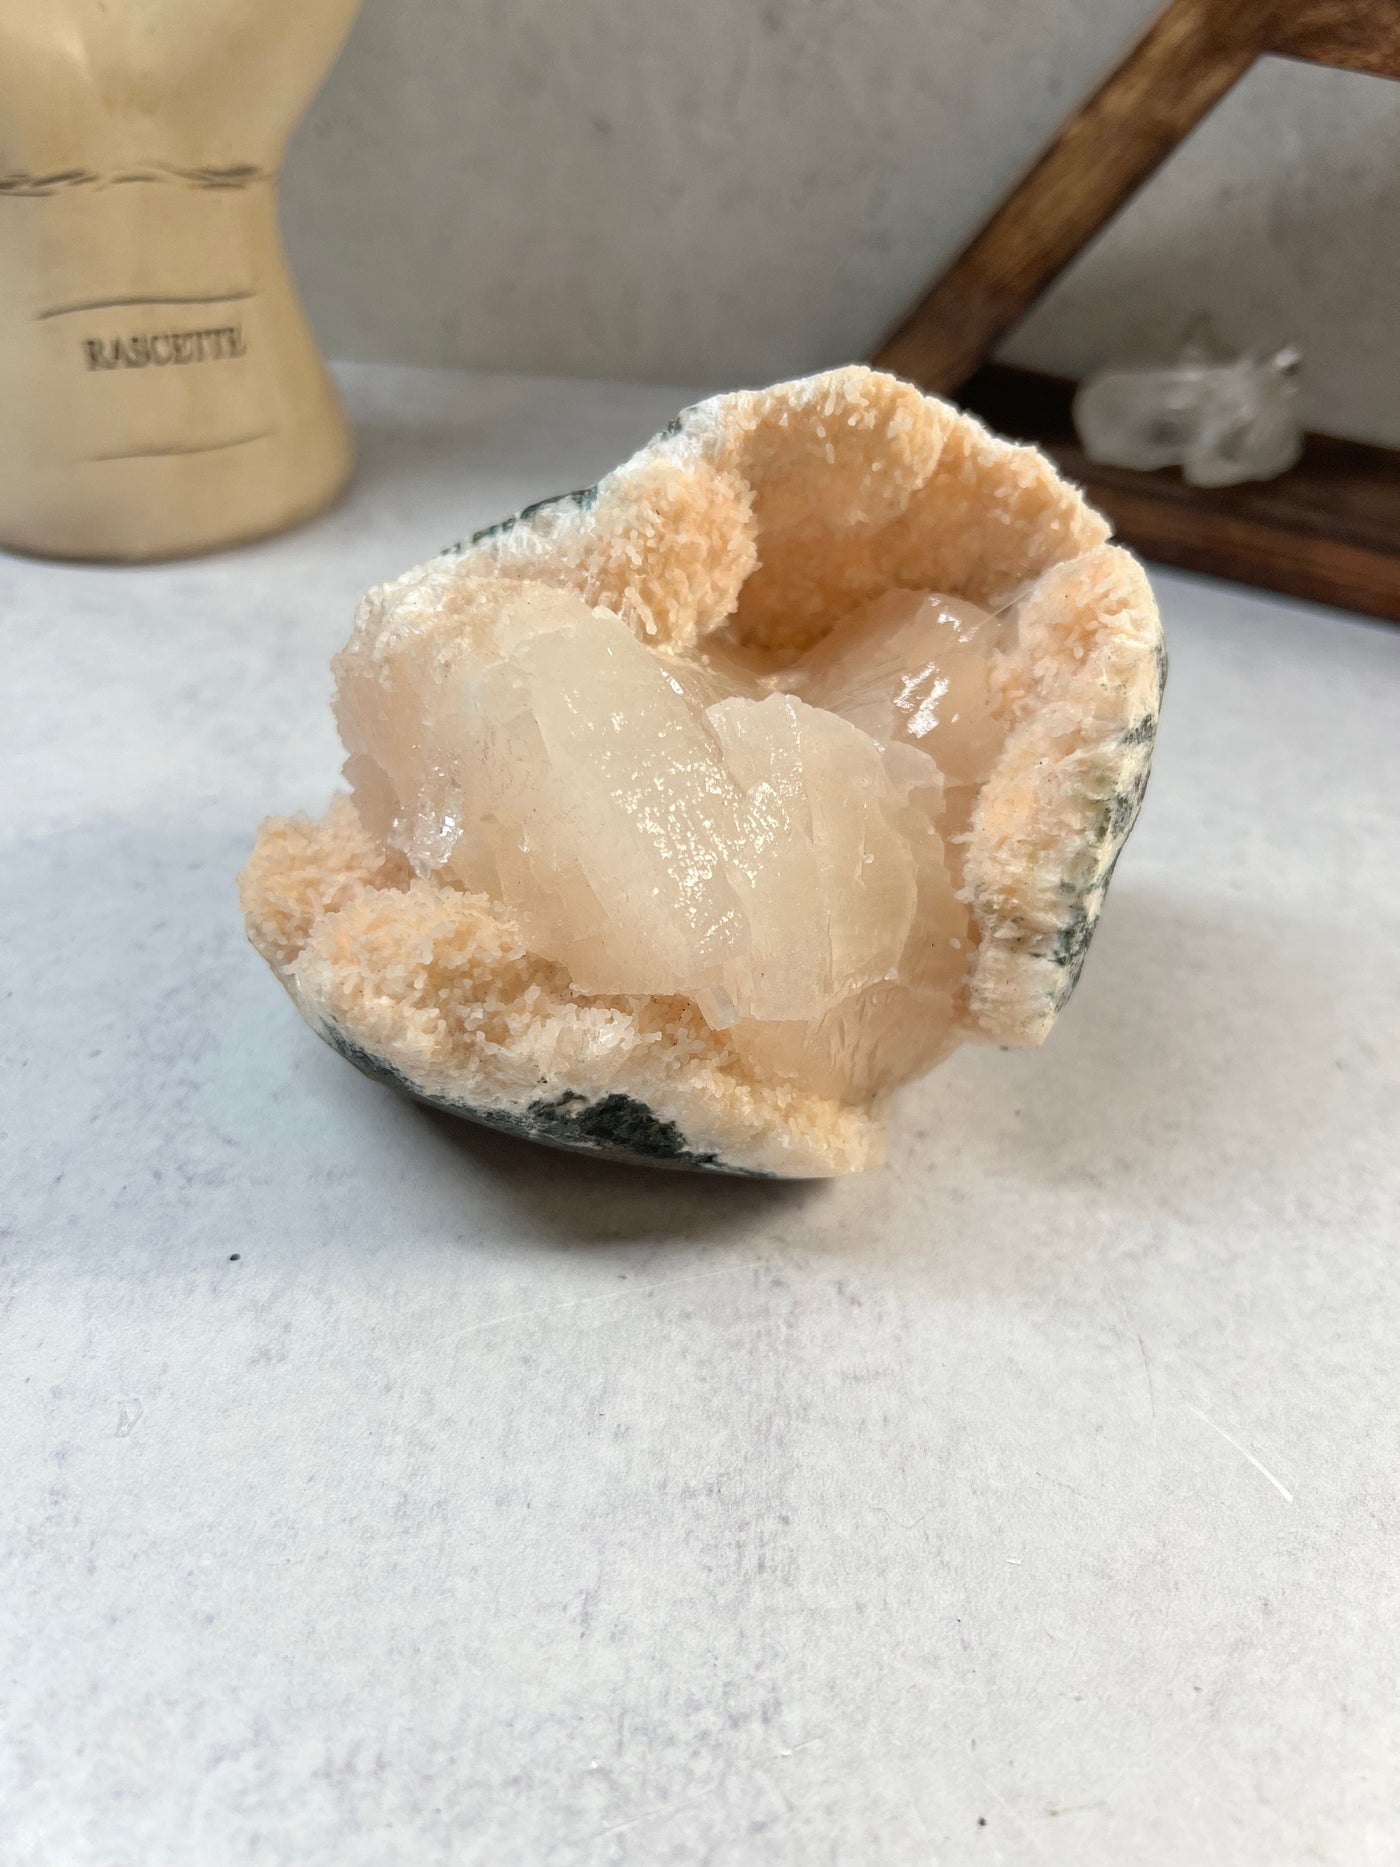 stilbite on matrix with decorations in the background